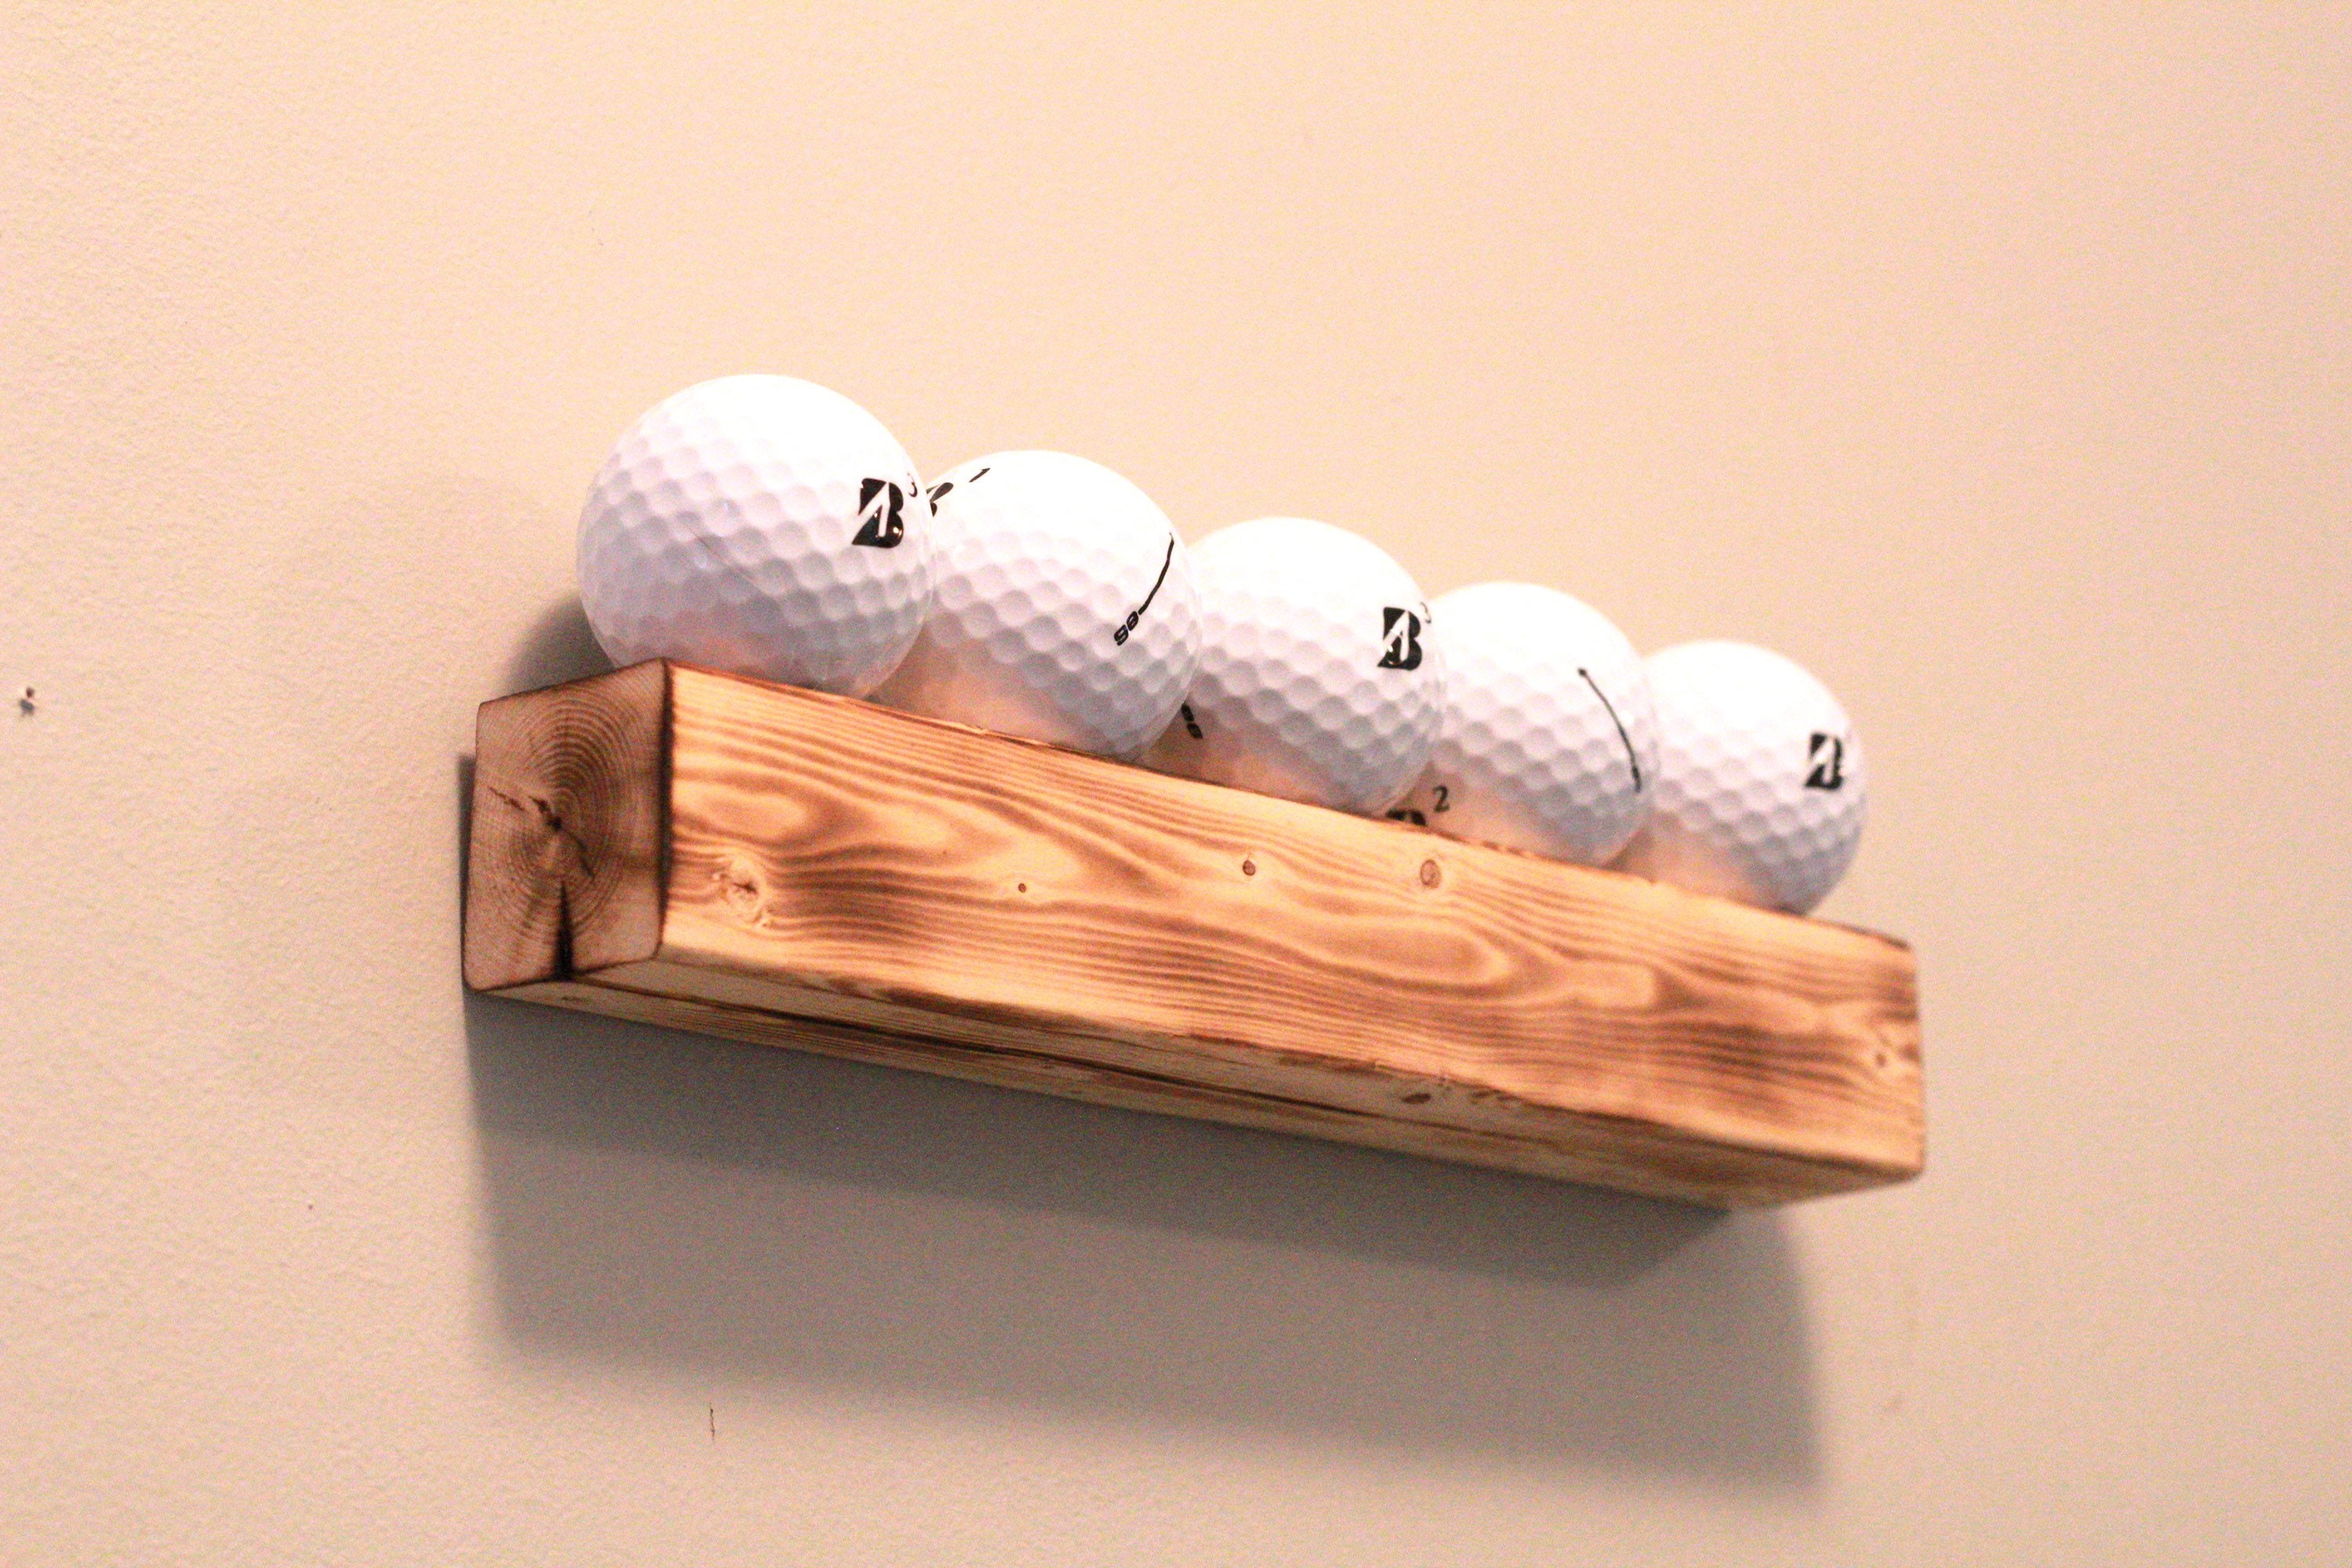 Tiered Golf Ball Holder, Wall Mounted Black Wood Golf Display Case Cabinet Shelf, Holds 16 Balls